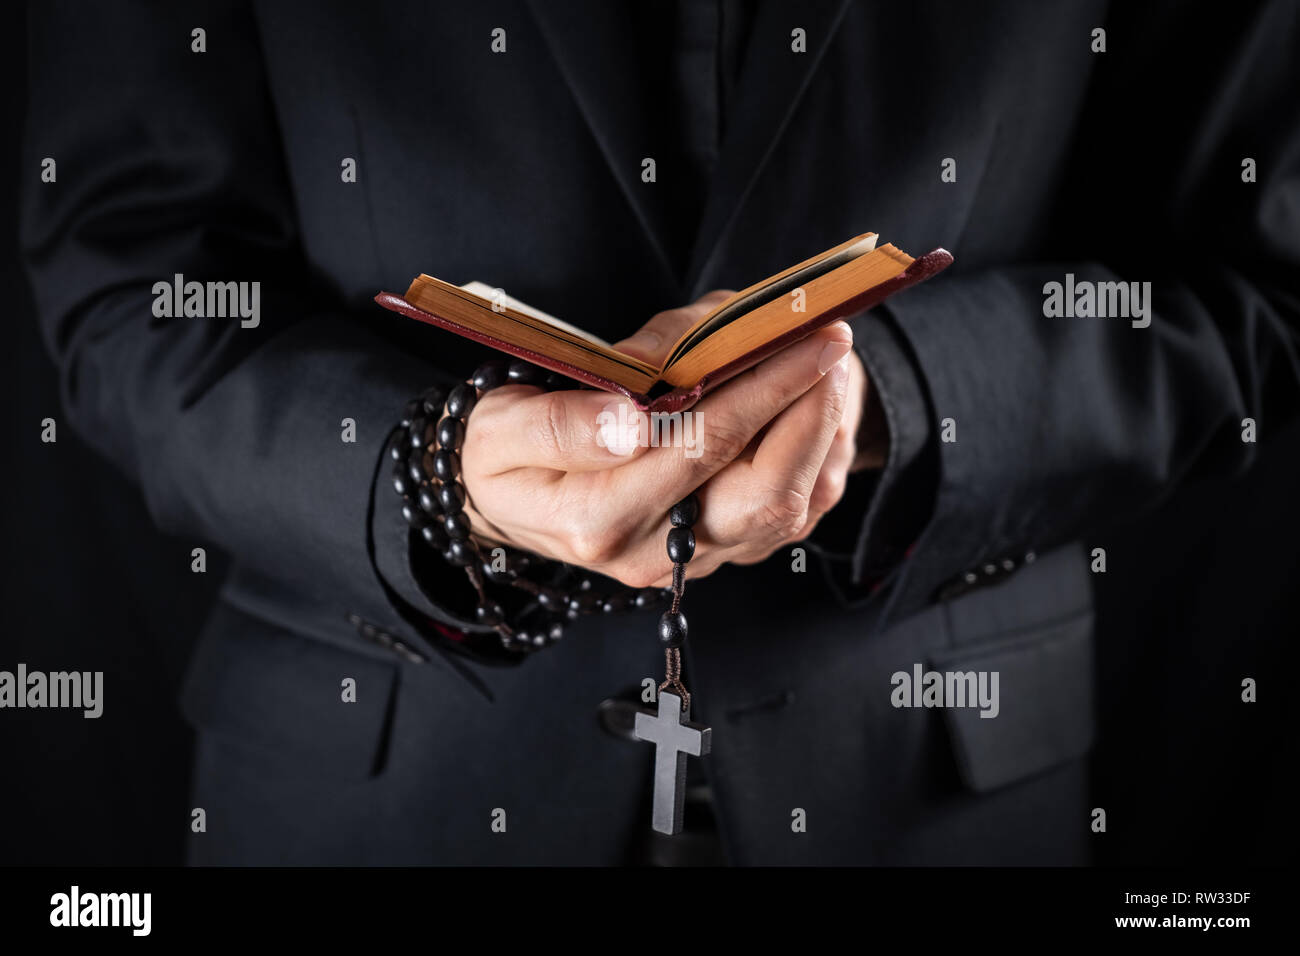 Hands of a christian priest dressed in black holding a crucifix and reading New Testament book. Religious person studies Bible and holds prayer beads, Stock Photo